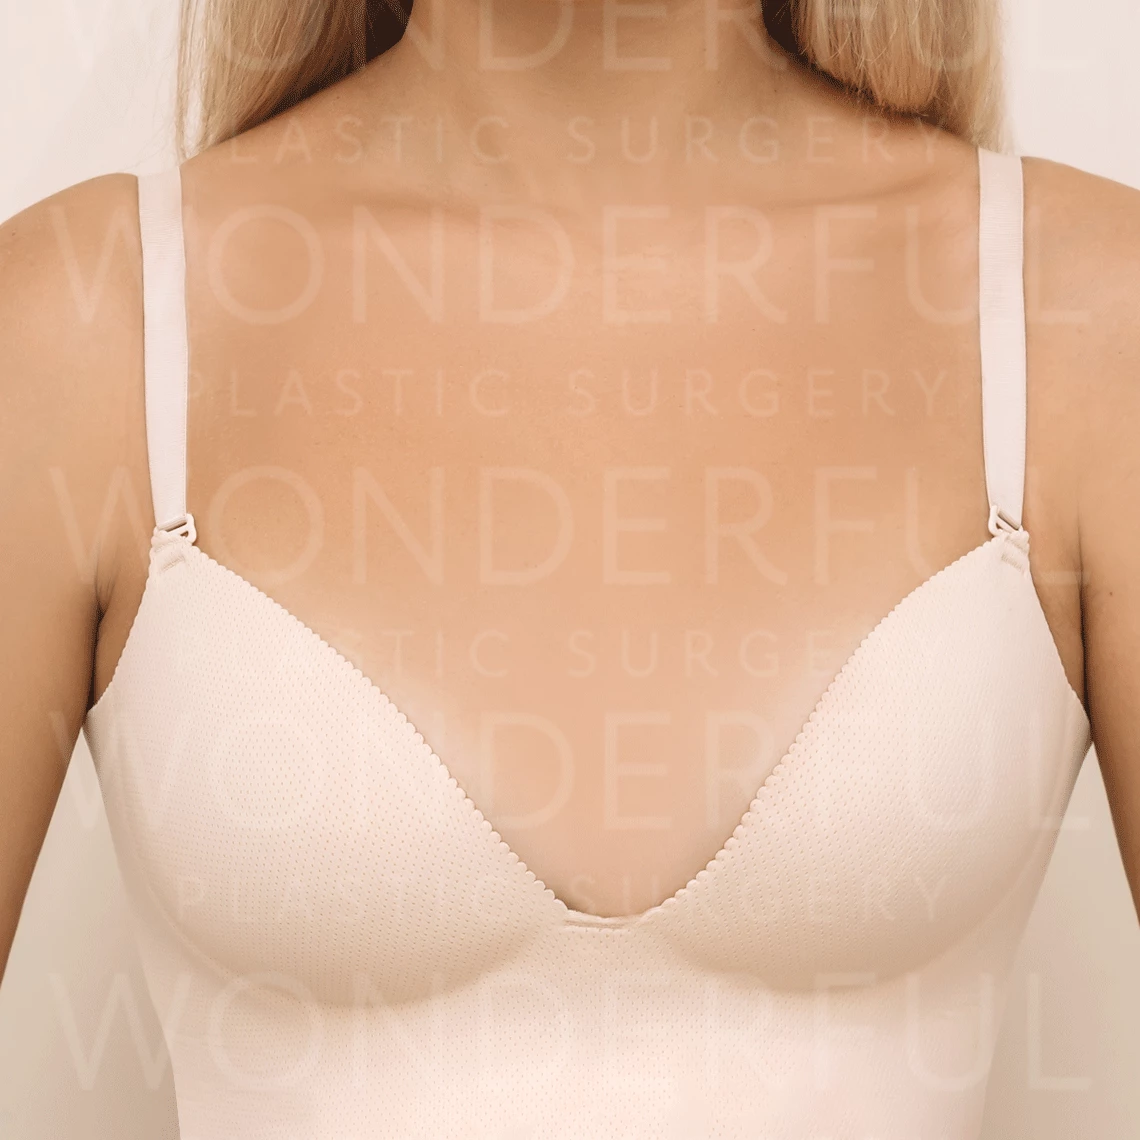 wonderful-plastic-surgery-hospital-korea-breast-augmentation-before-after-results-bfore-2